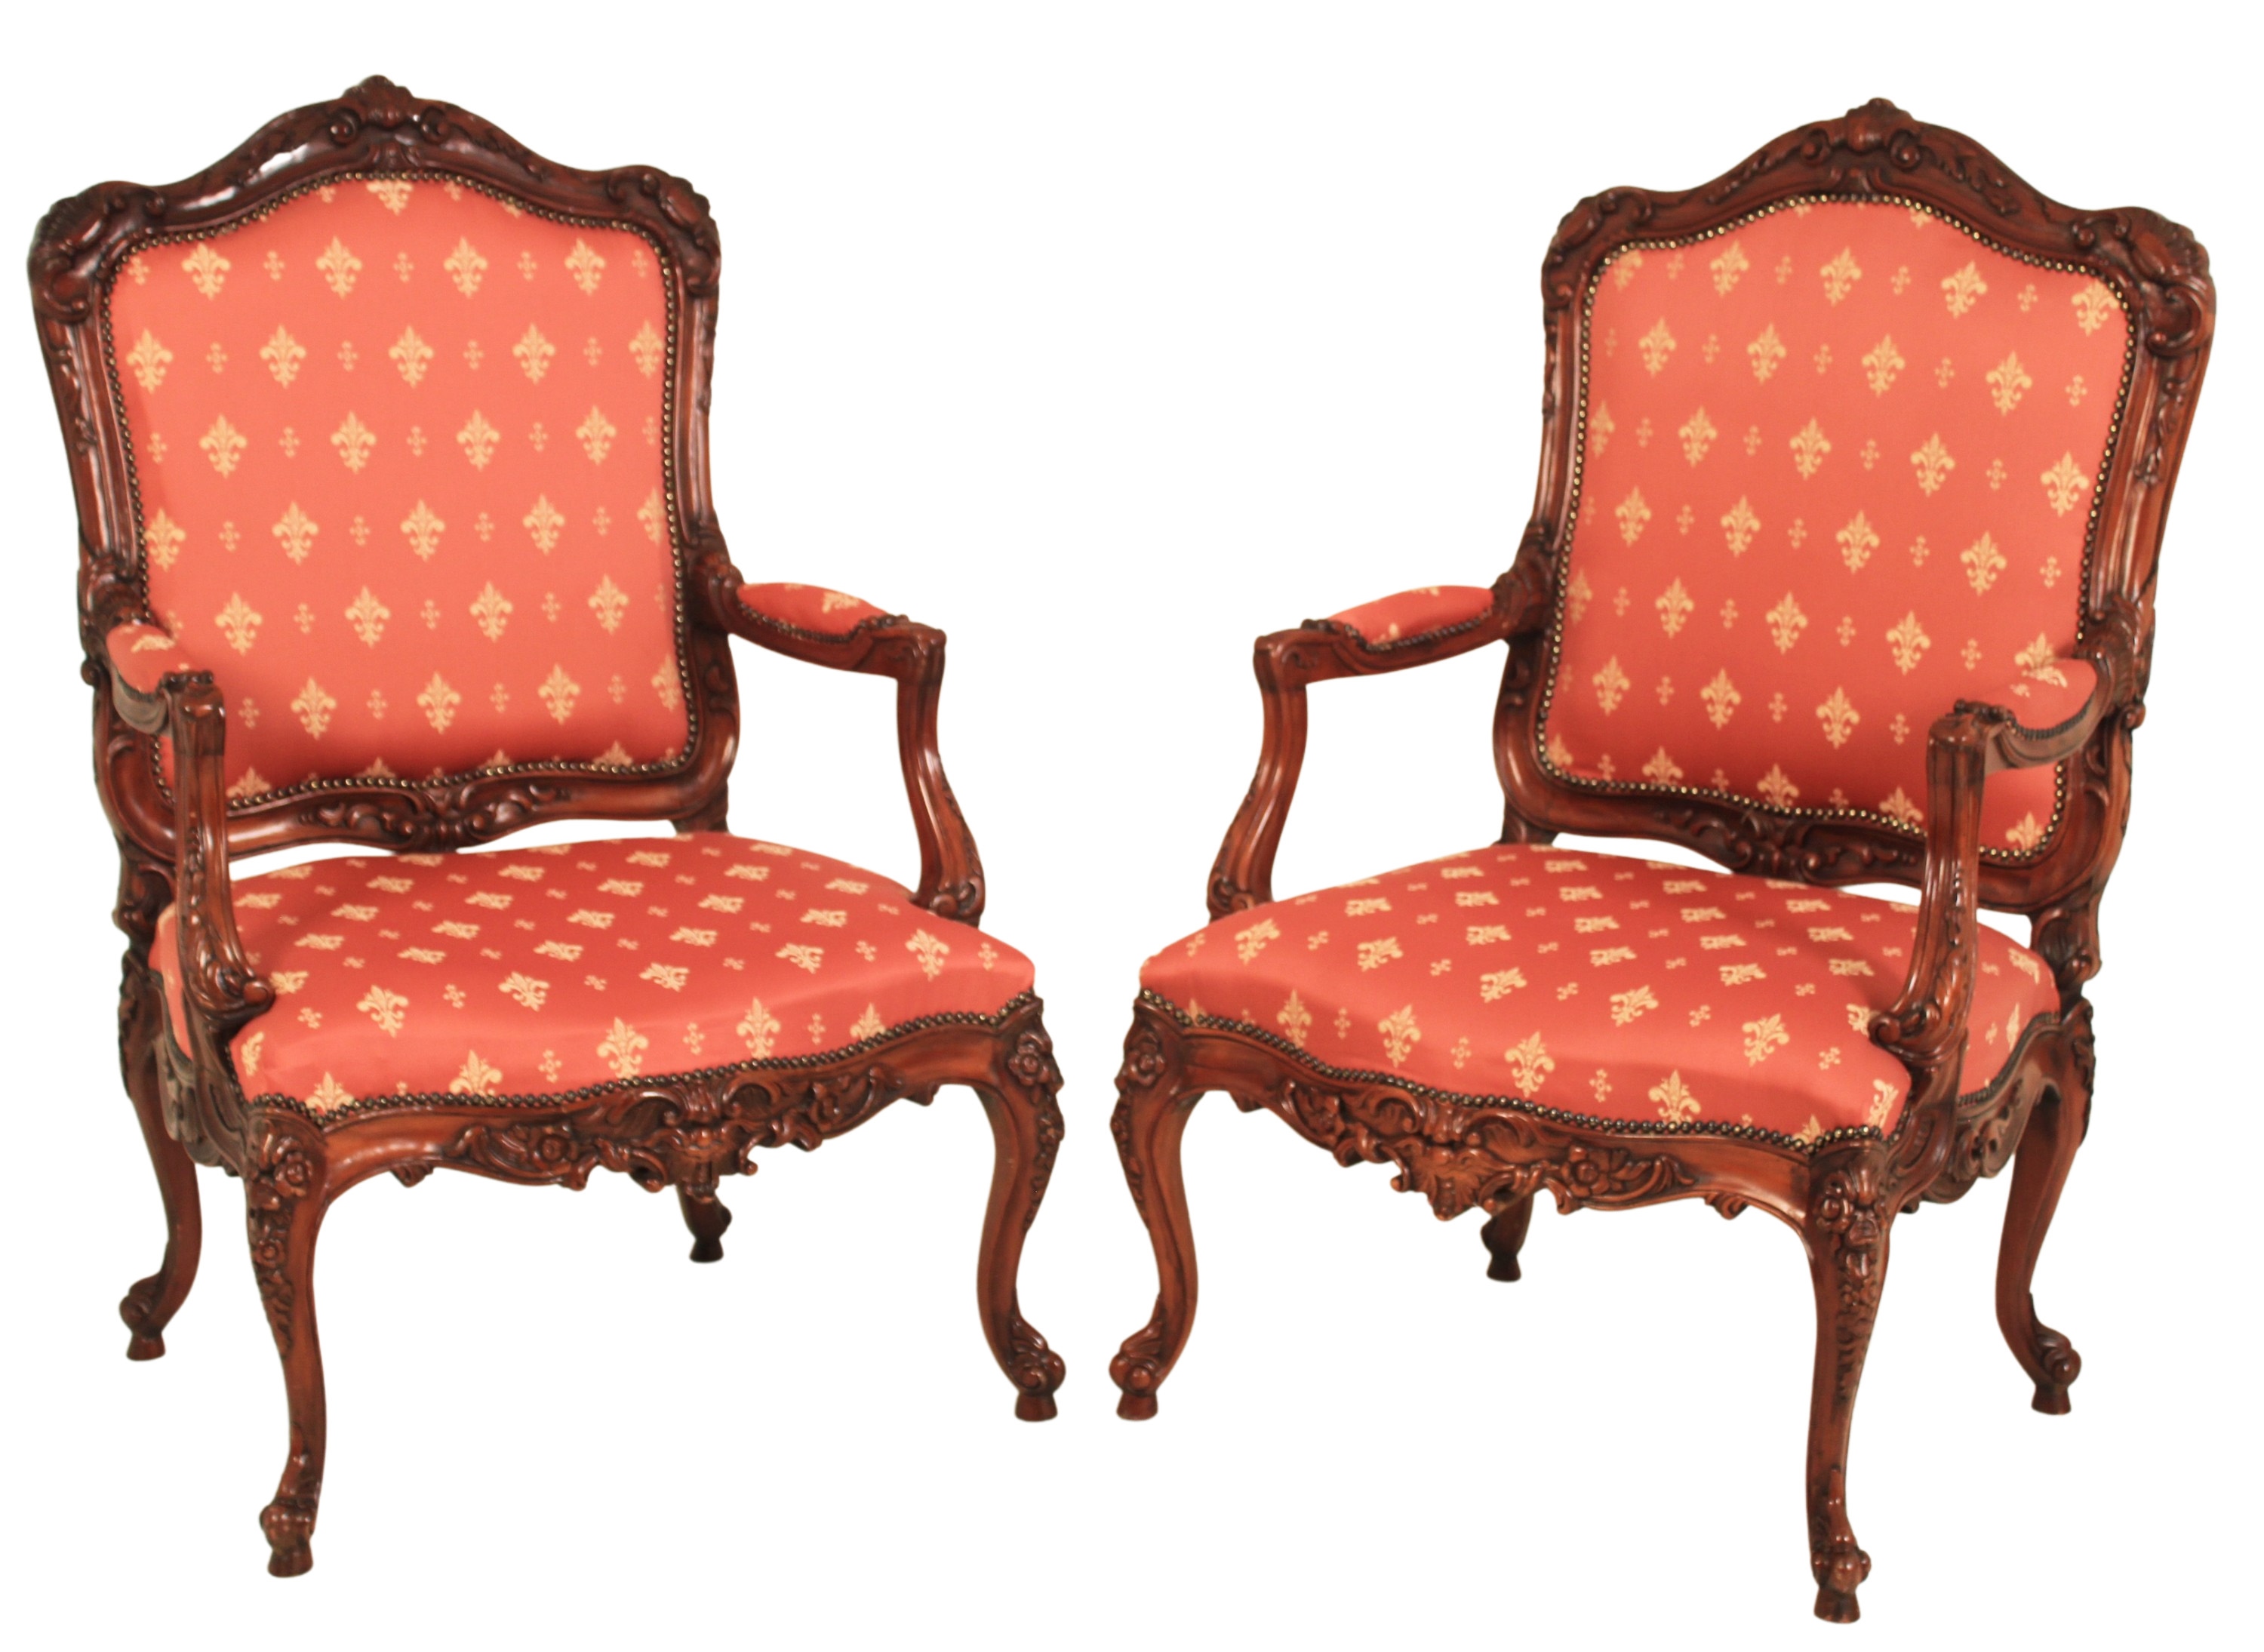 PR OF FRENCH LOUIS XV STYLE FAUTEUILS 2f8bd8